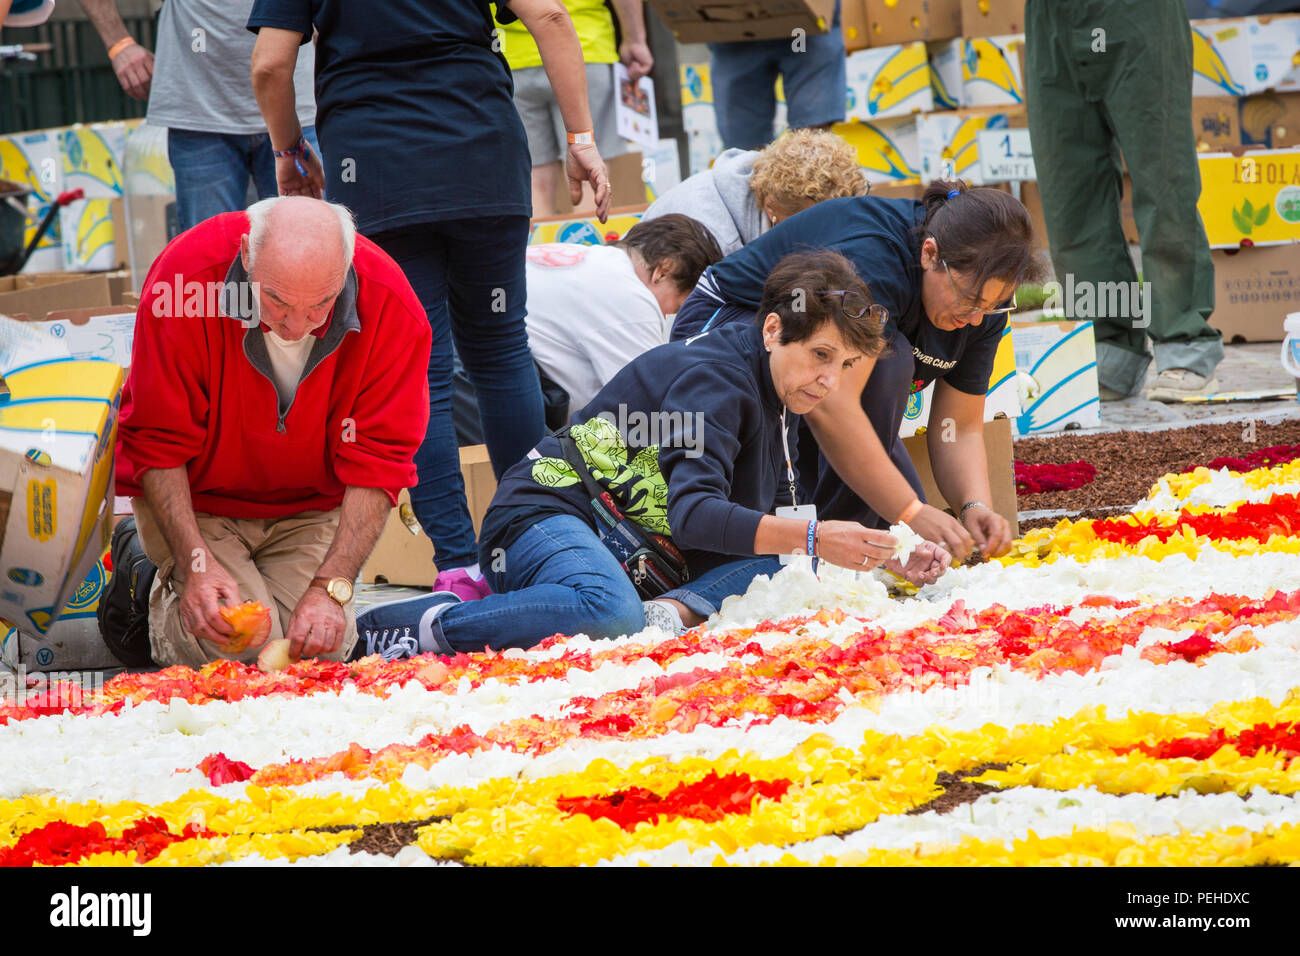 Brussels, Belgium. 16th Aug 2018. Every 2 Years the Grand-Place in Brussels is covered with a flower carpet. The 2018 theme is Mexico the flower carpet is dedicated to Guanajuato a Mexican region. Credit: steven roe/Alamy Live News Stock Photo